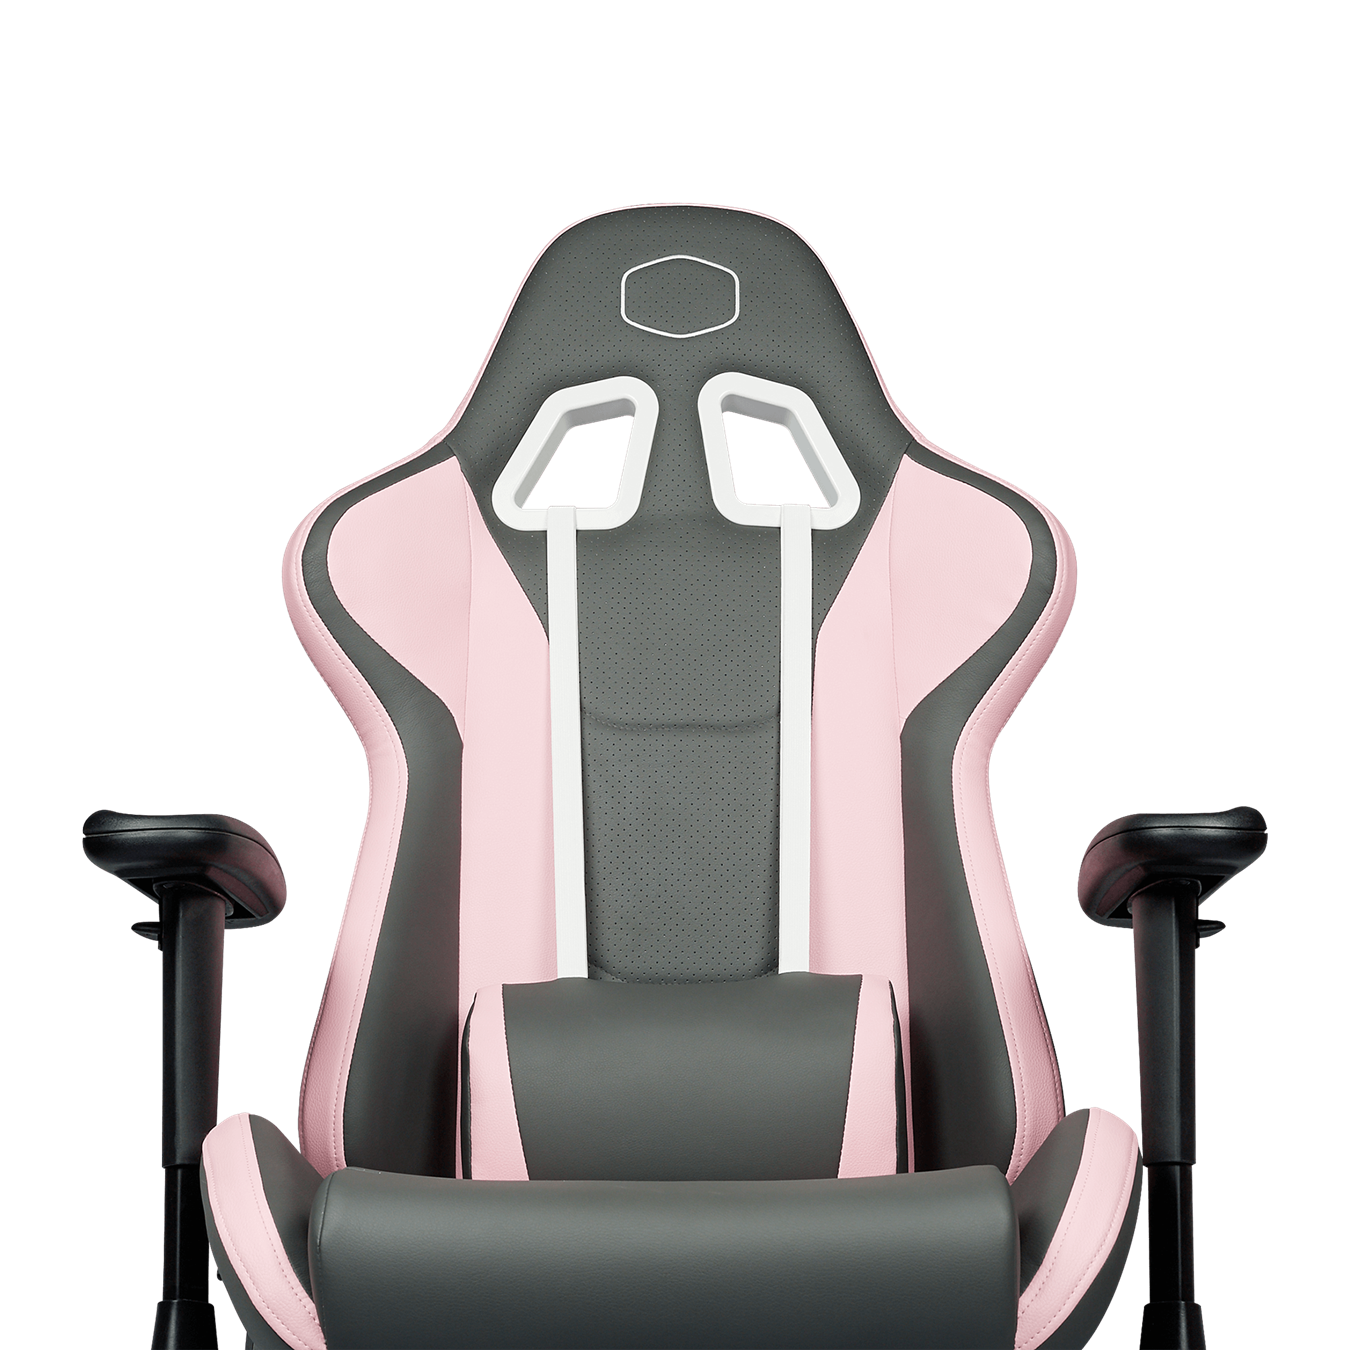 Caliber R1S Rose Grey Edition Gaming Chair - Premium quality and design sets you apart from the competition.